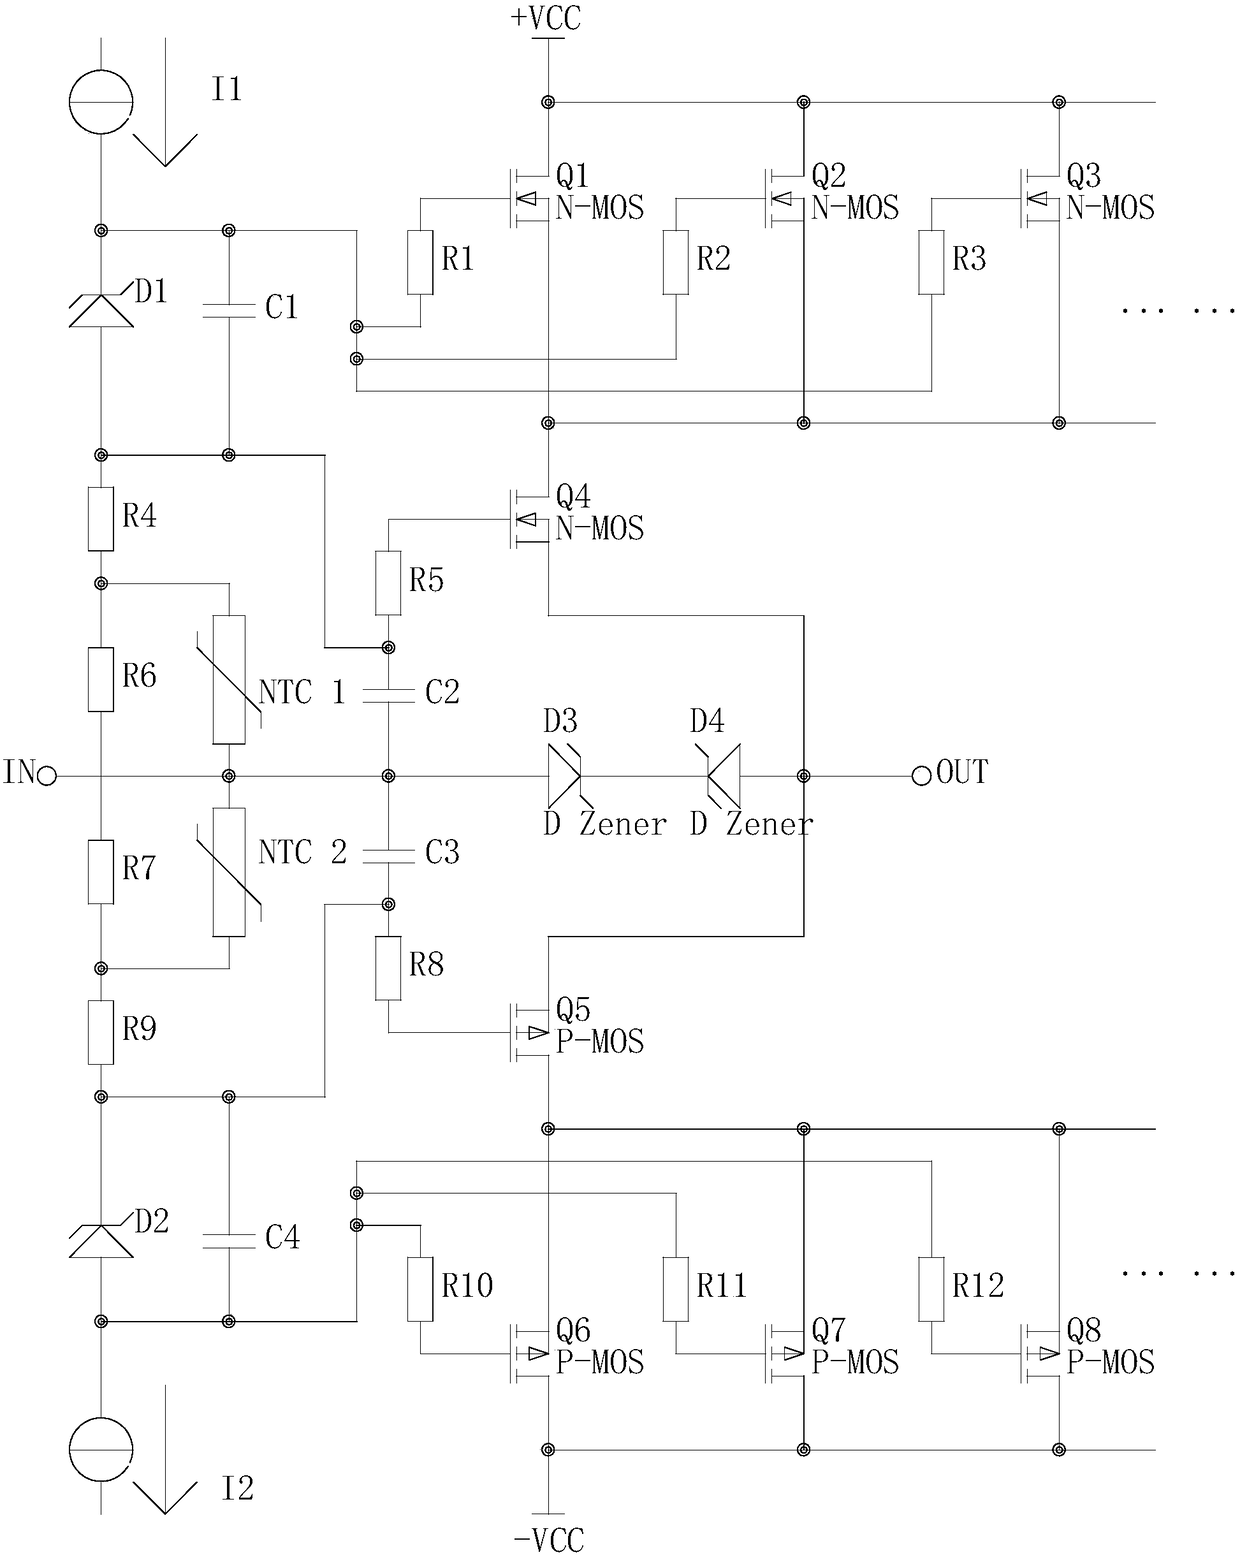 A Complementary Output Circuit of High Power Field Effect Transistor without Source Resistor